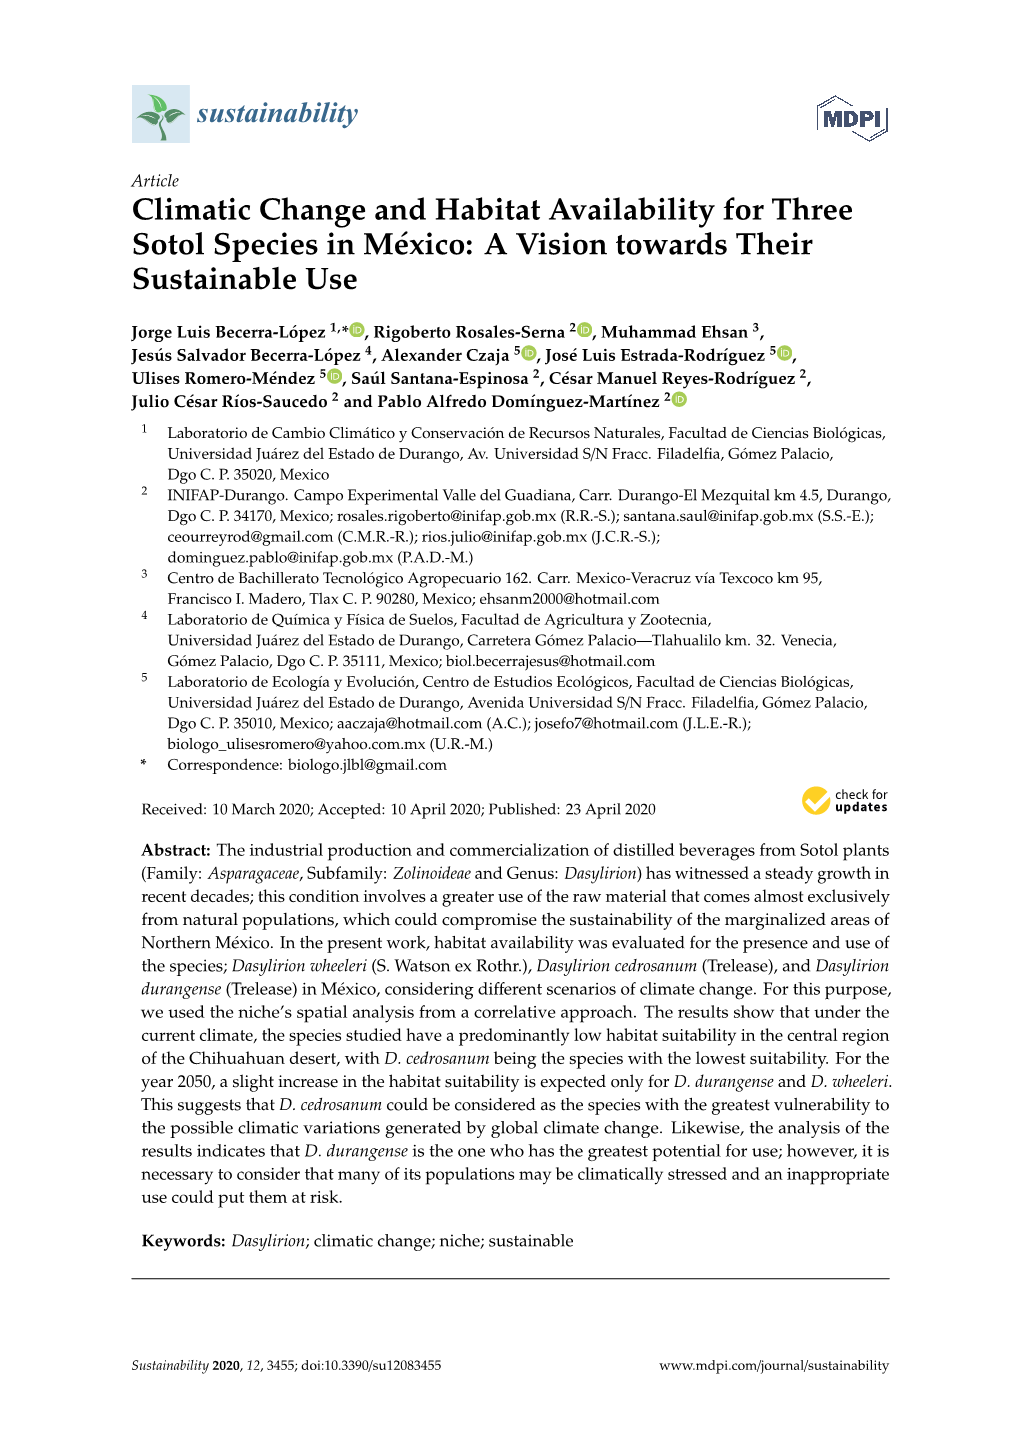 Climatic Change and Habitat Availability for Three Sotol Species in México: a Vision Towards Their Sustainable Use